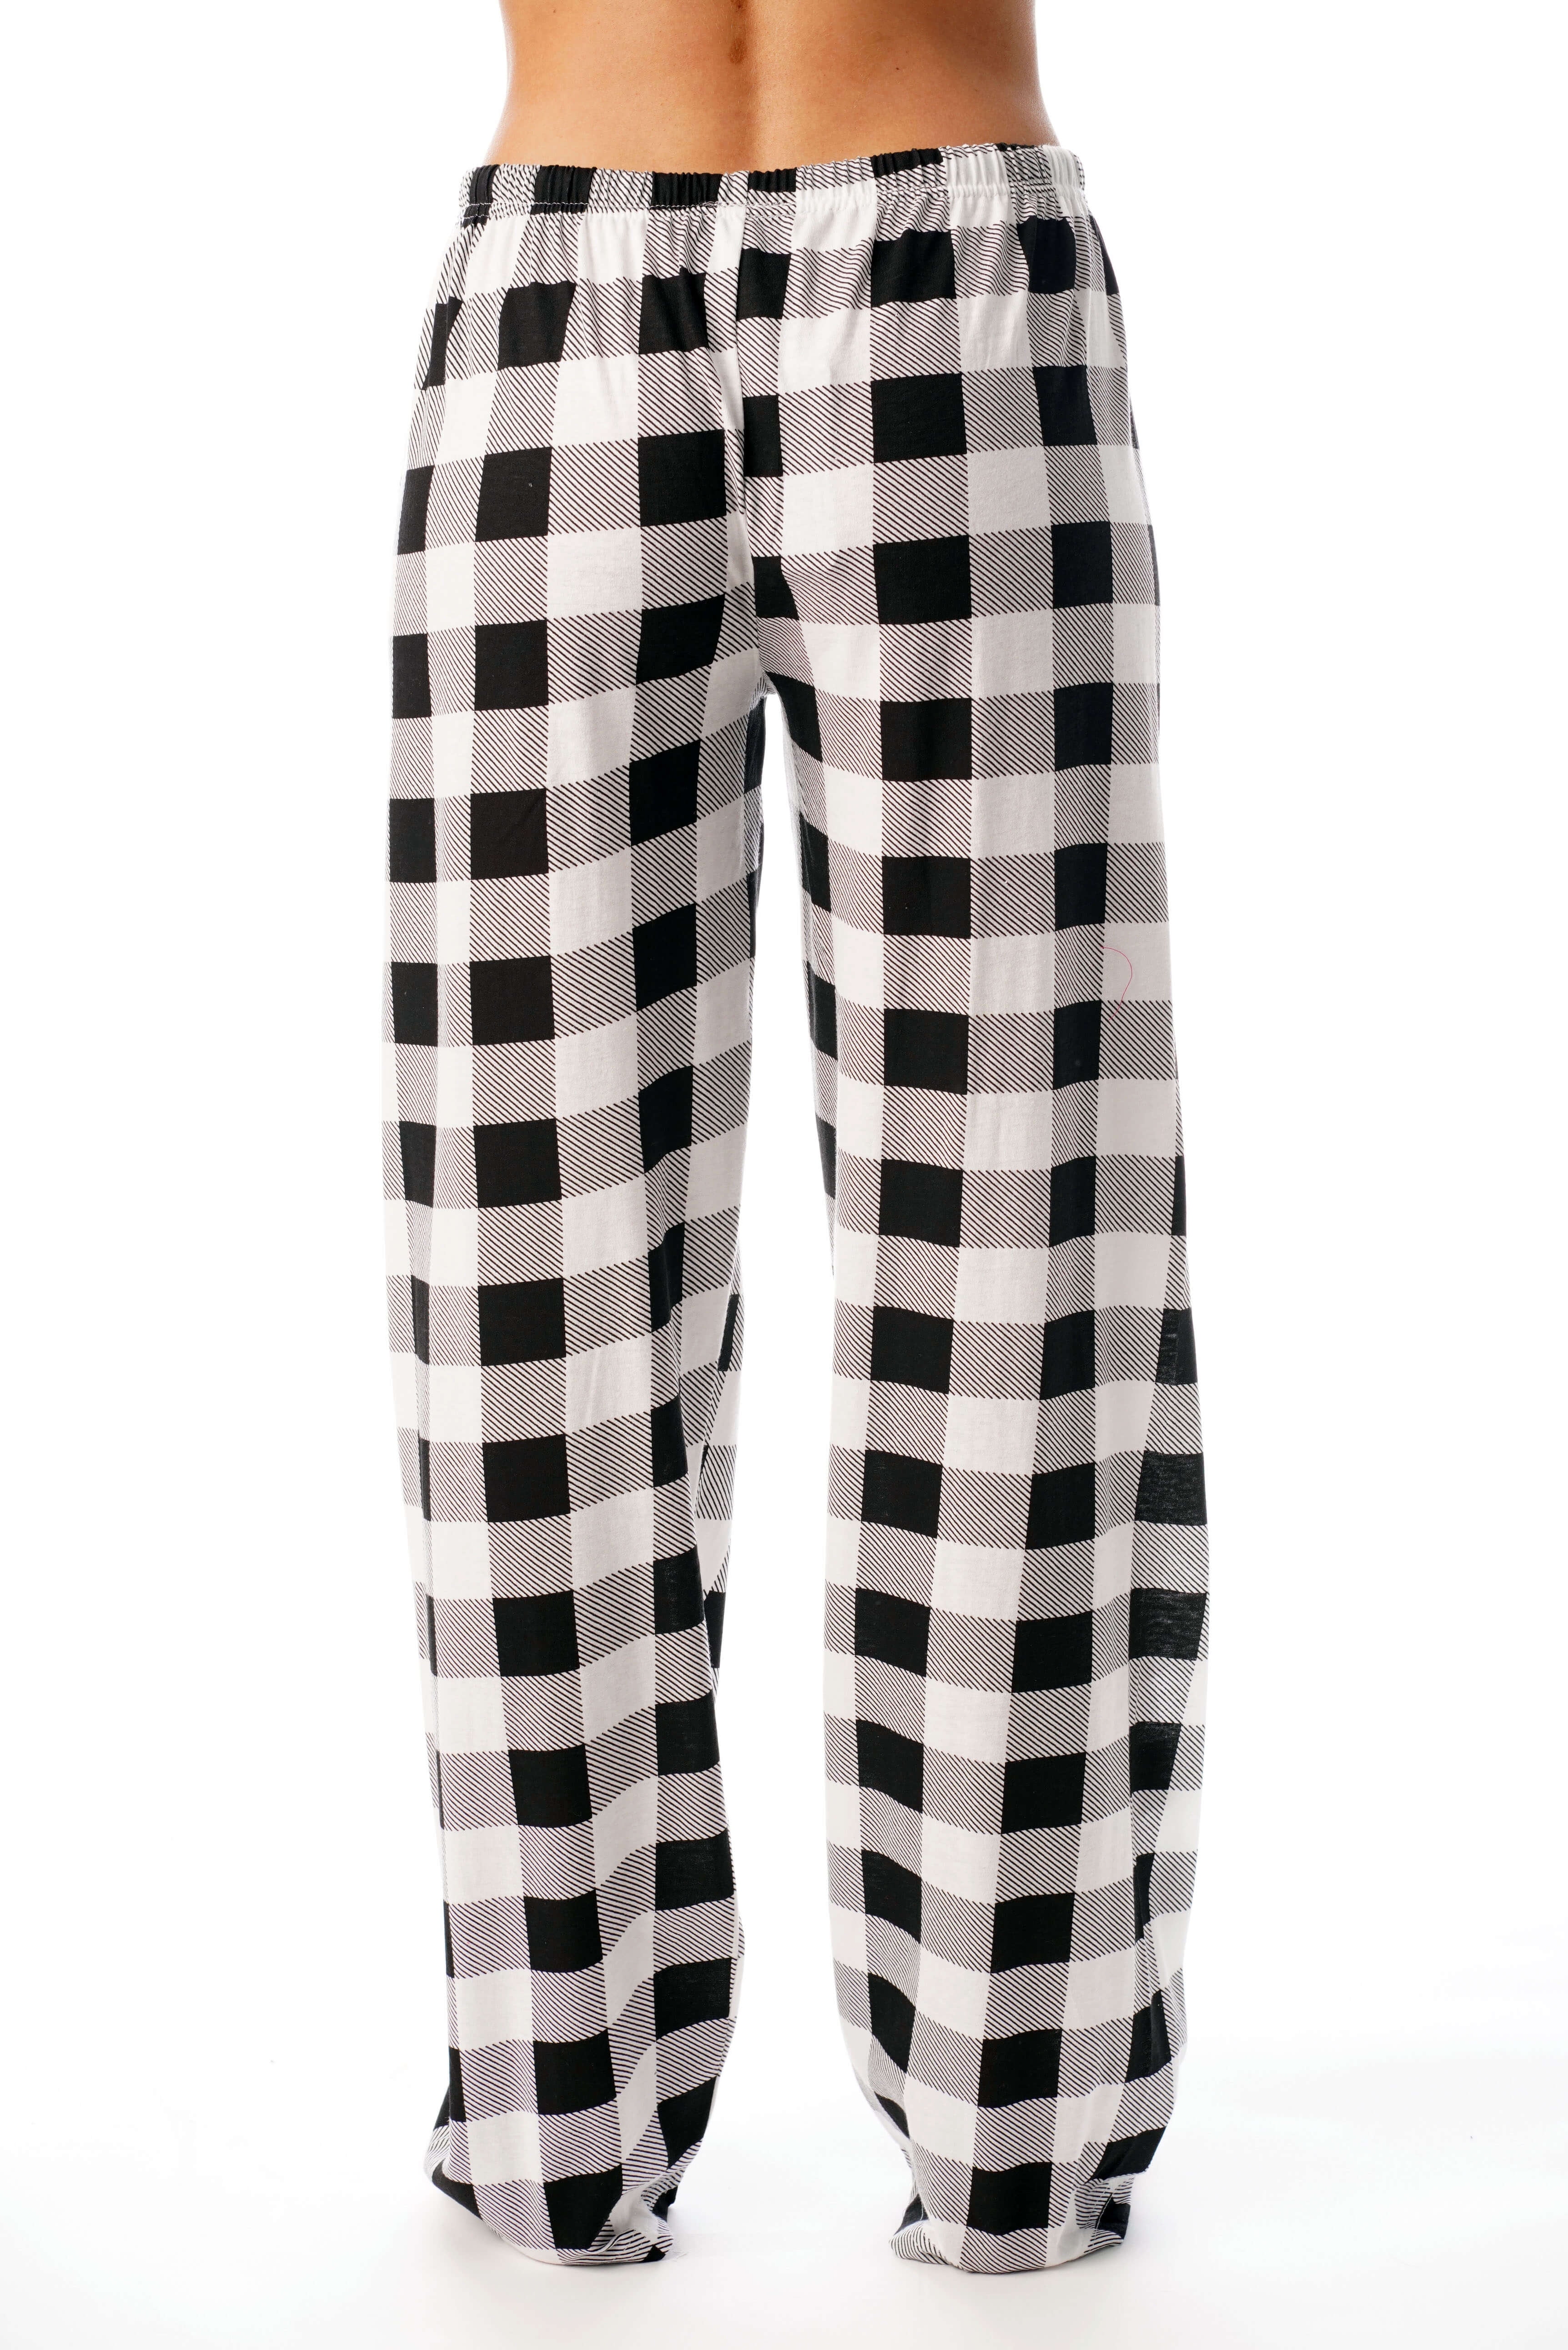 J.Crew: End-on-end Cotton Wide-leg Pajama Pant For Women